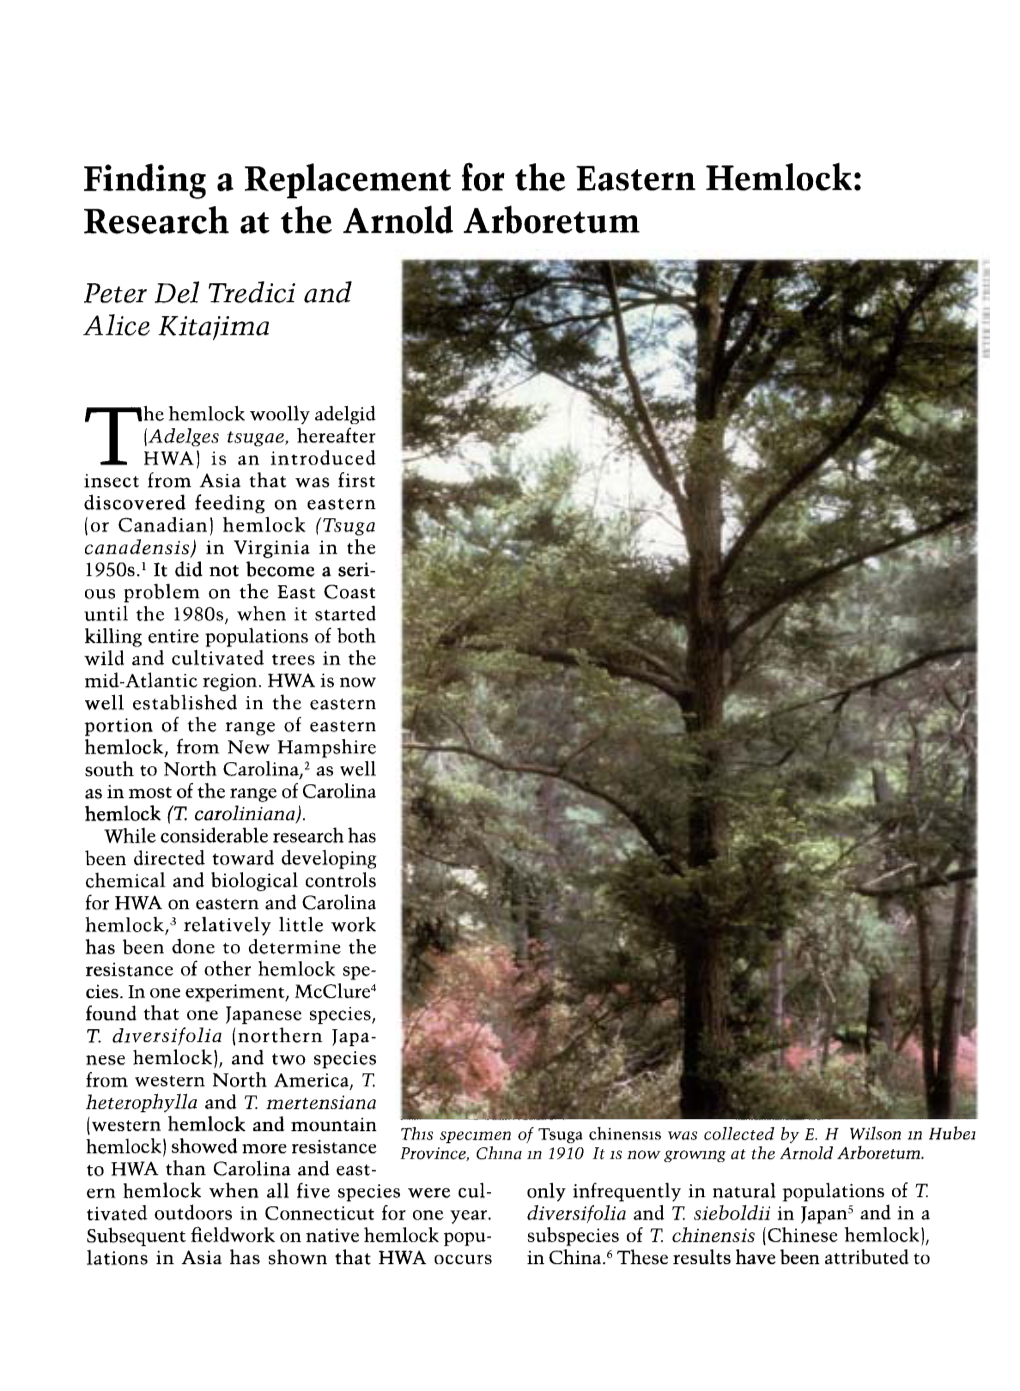 Finding a Replacement for the Eastern Hemlock: Research at the Arnold Arboretum